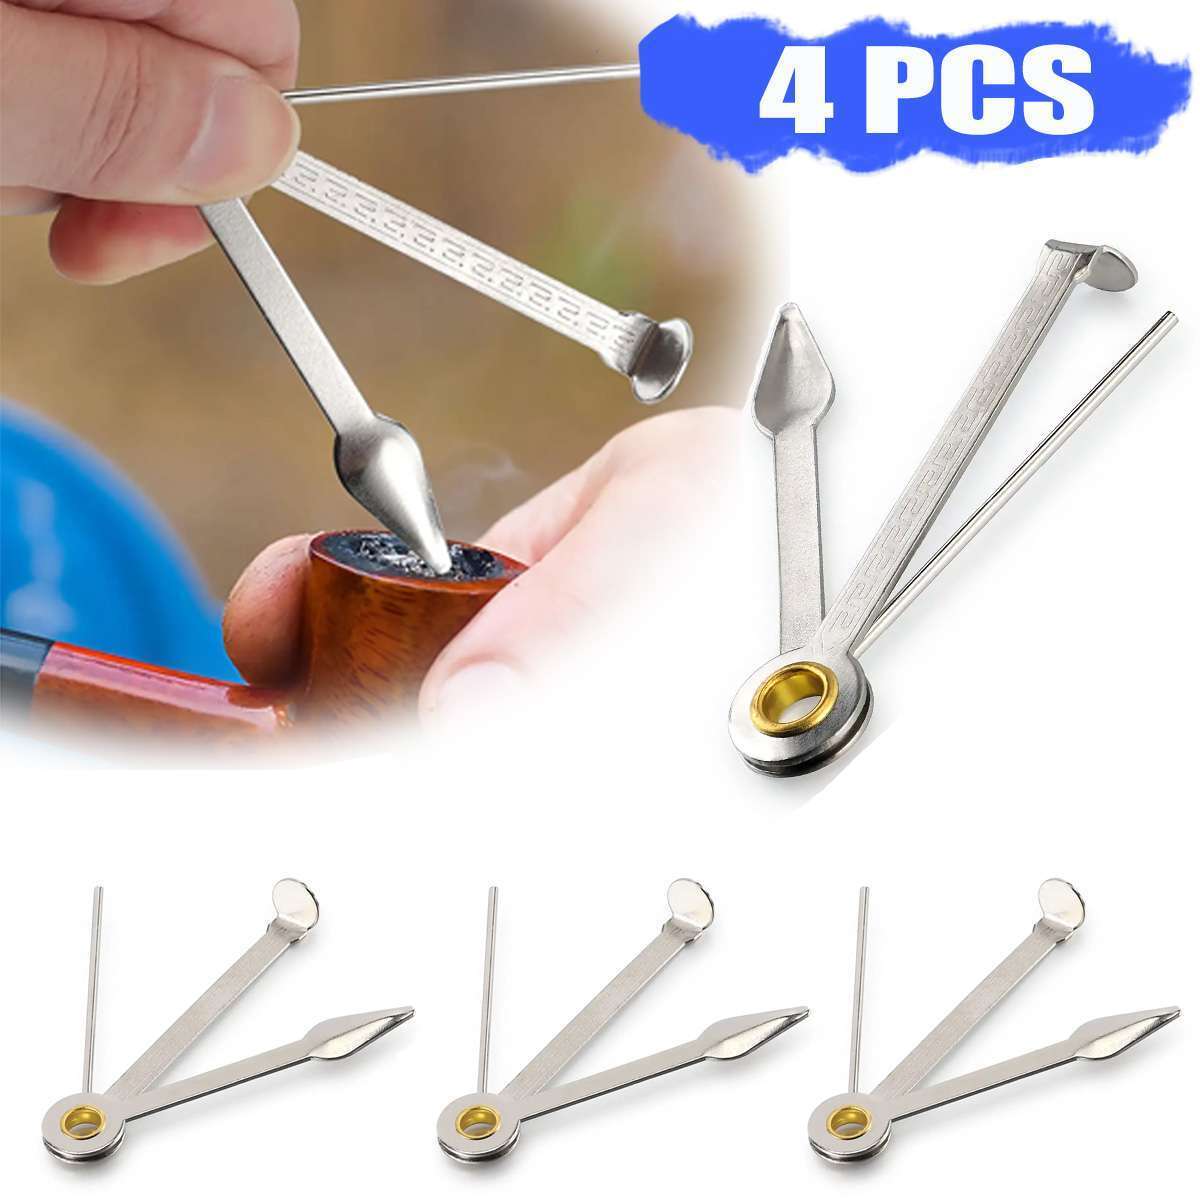 4pcs Pipe Tamper Reamer Tobacco 3 in 1 Smoking Cleaning Tool Stainless Steel